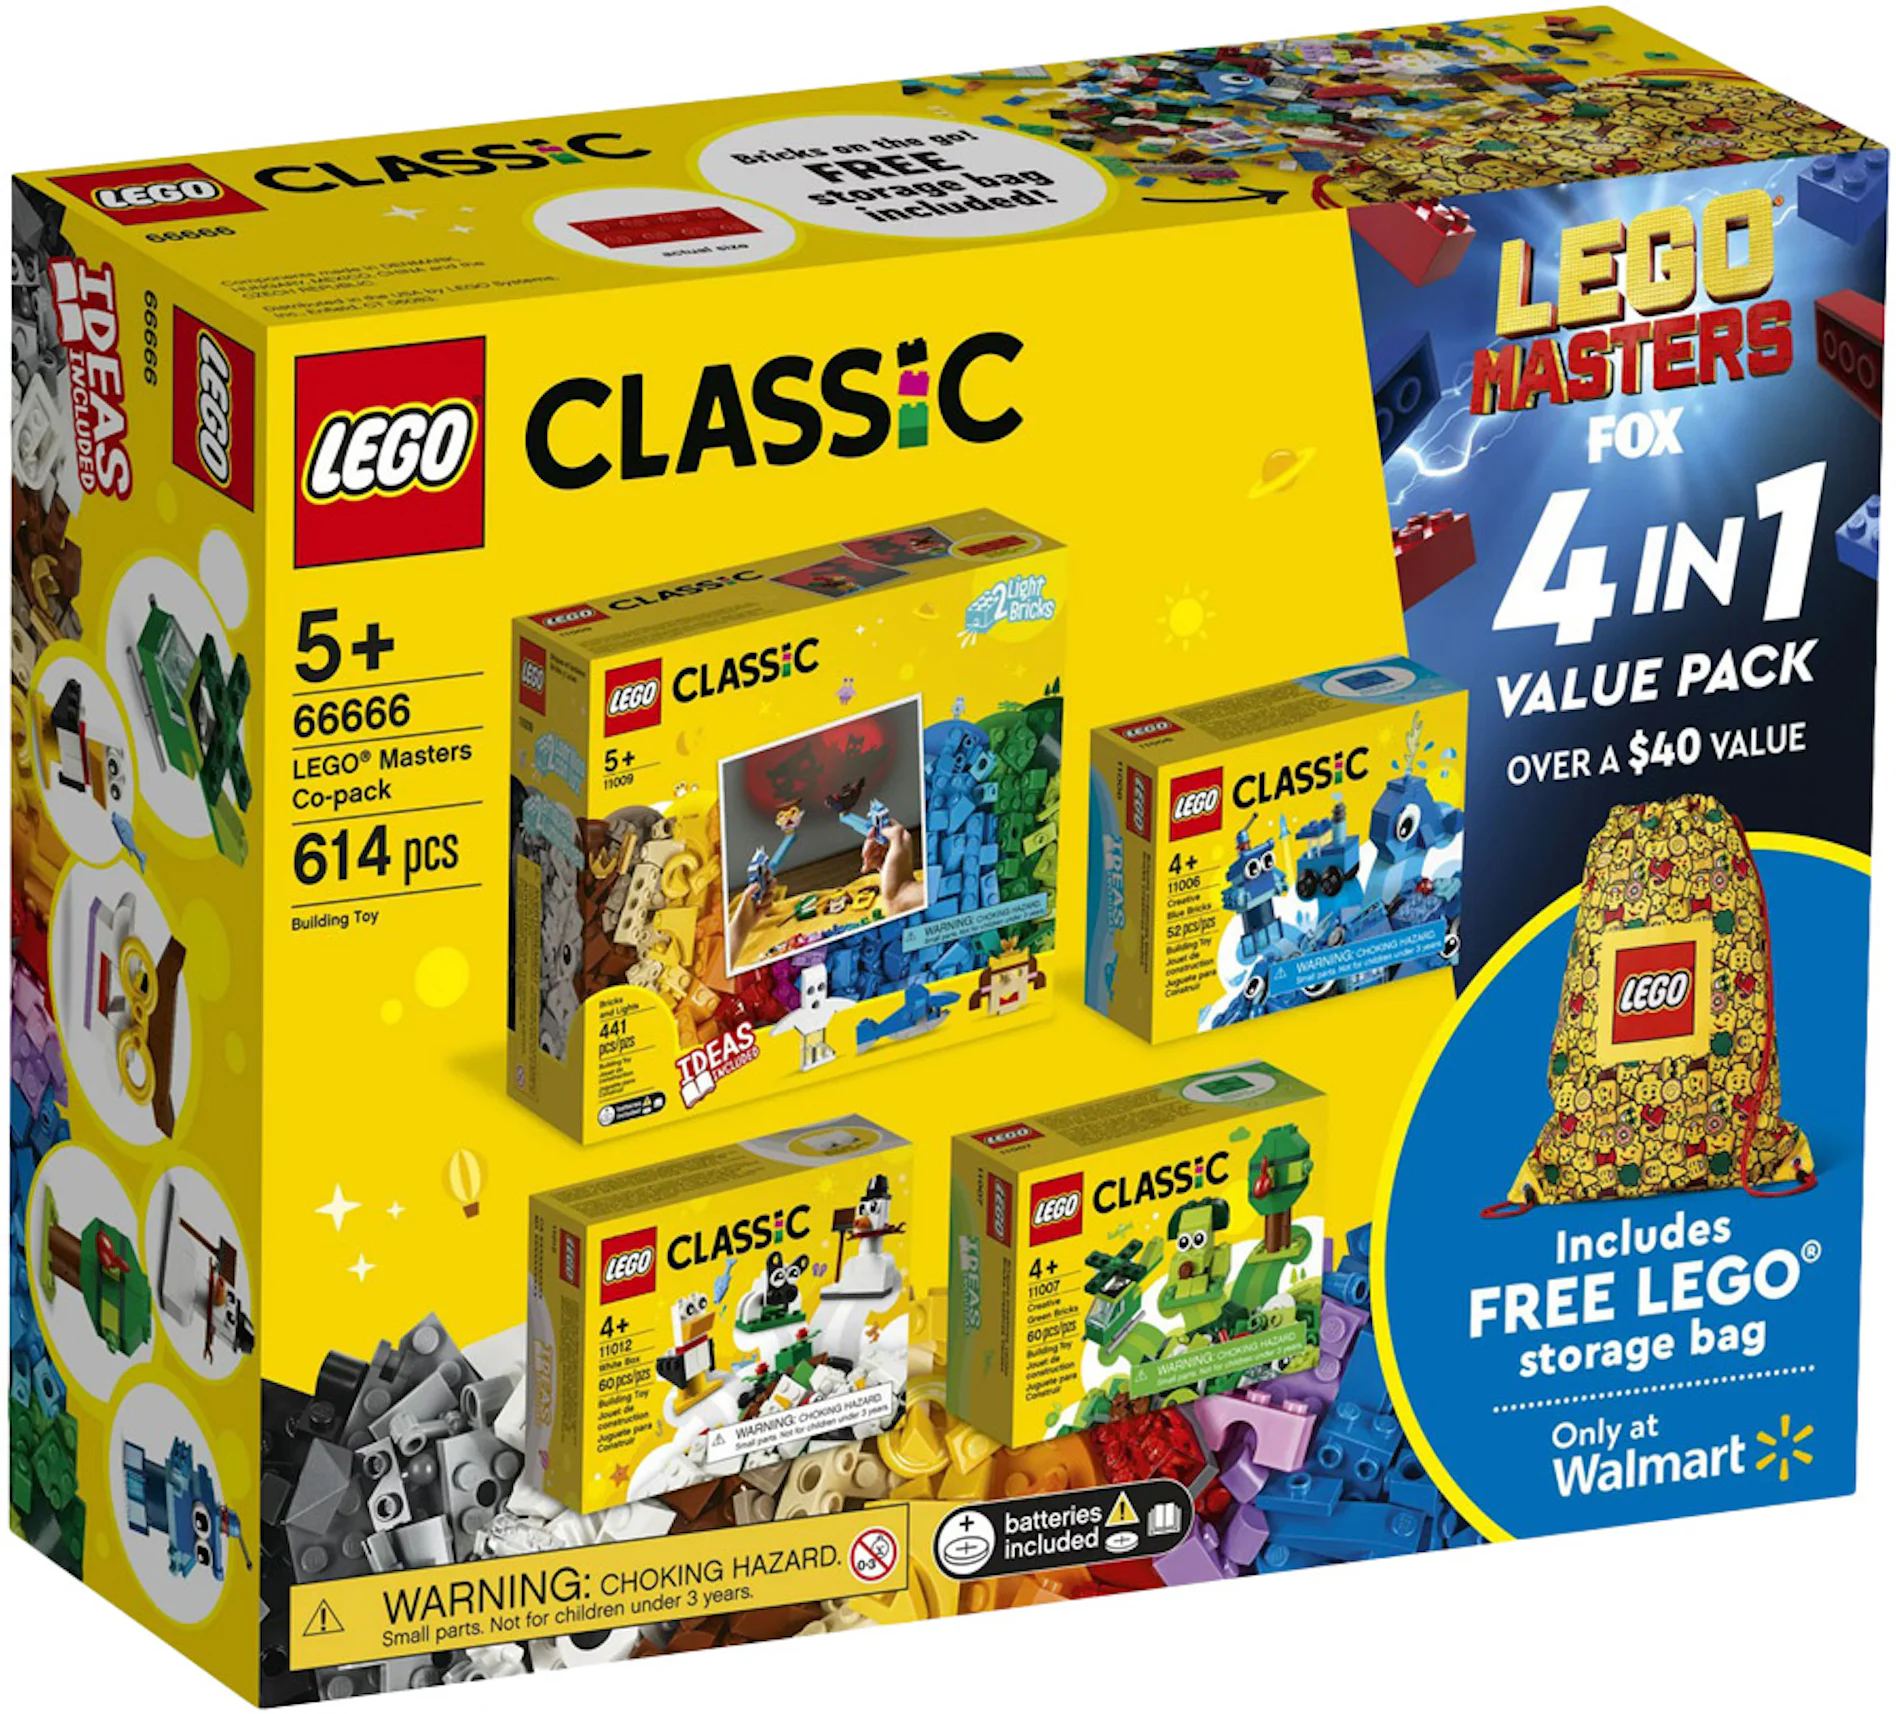 Lego Masters Co-Pack 66666 Creative Building Toy Value Set (613 Pieces)